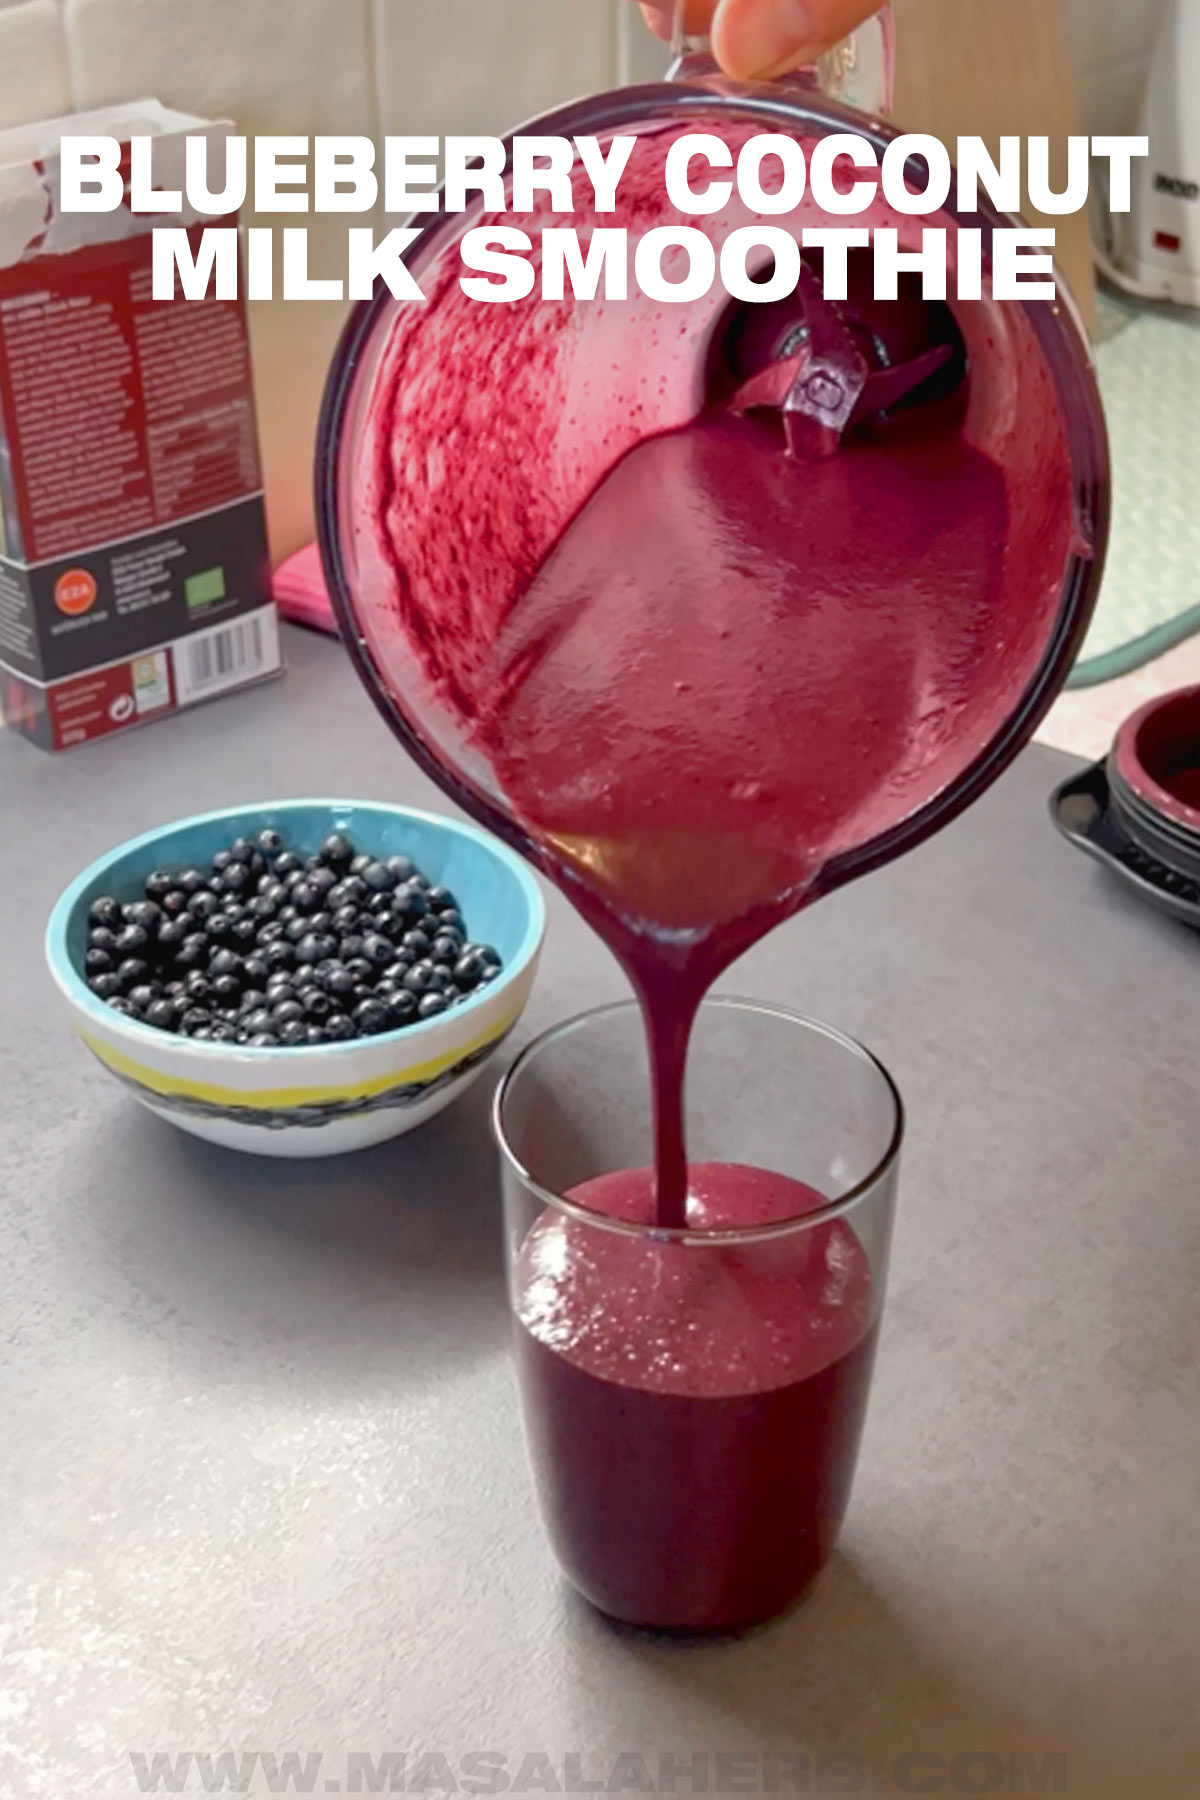 Blueberry Coconut Smoothie Recipe pin image